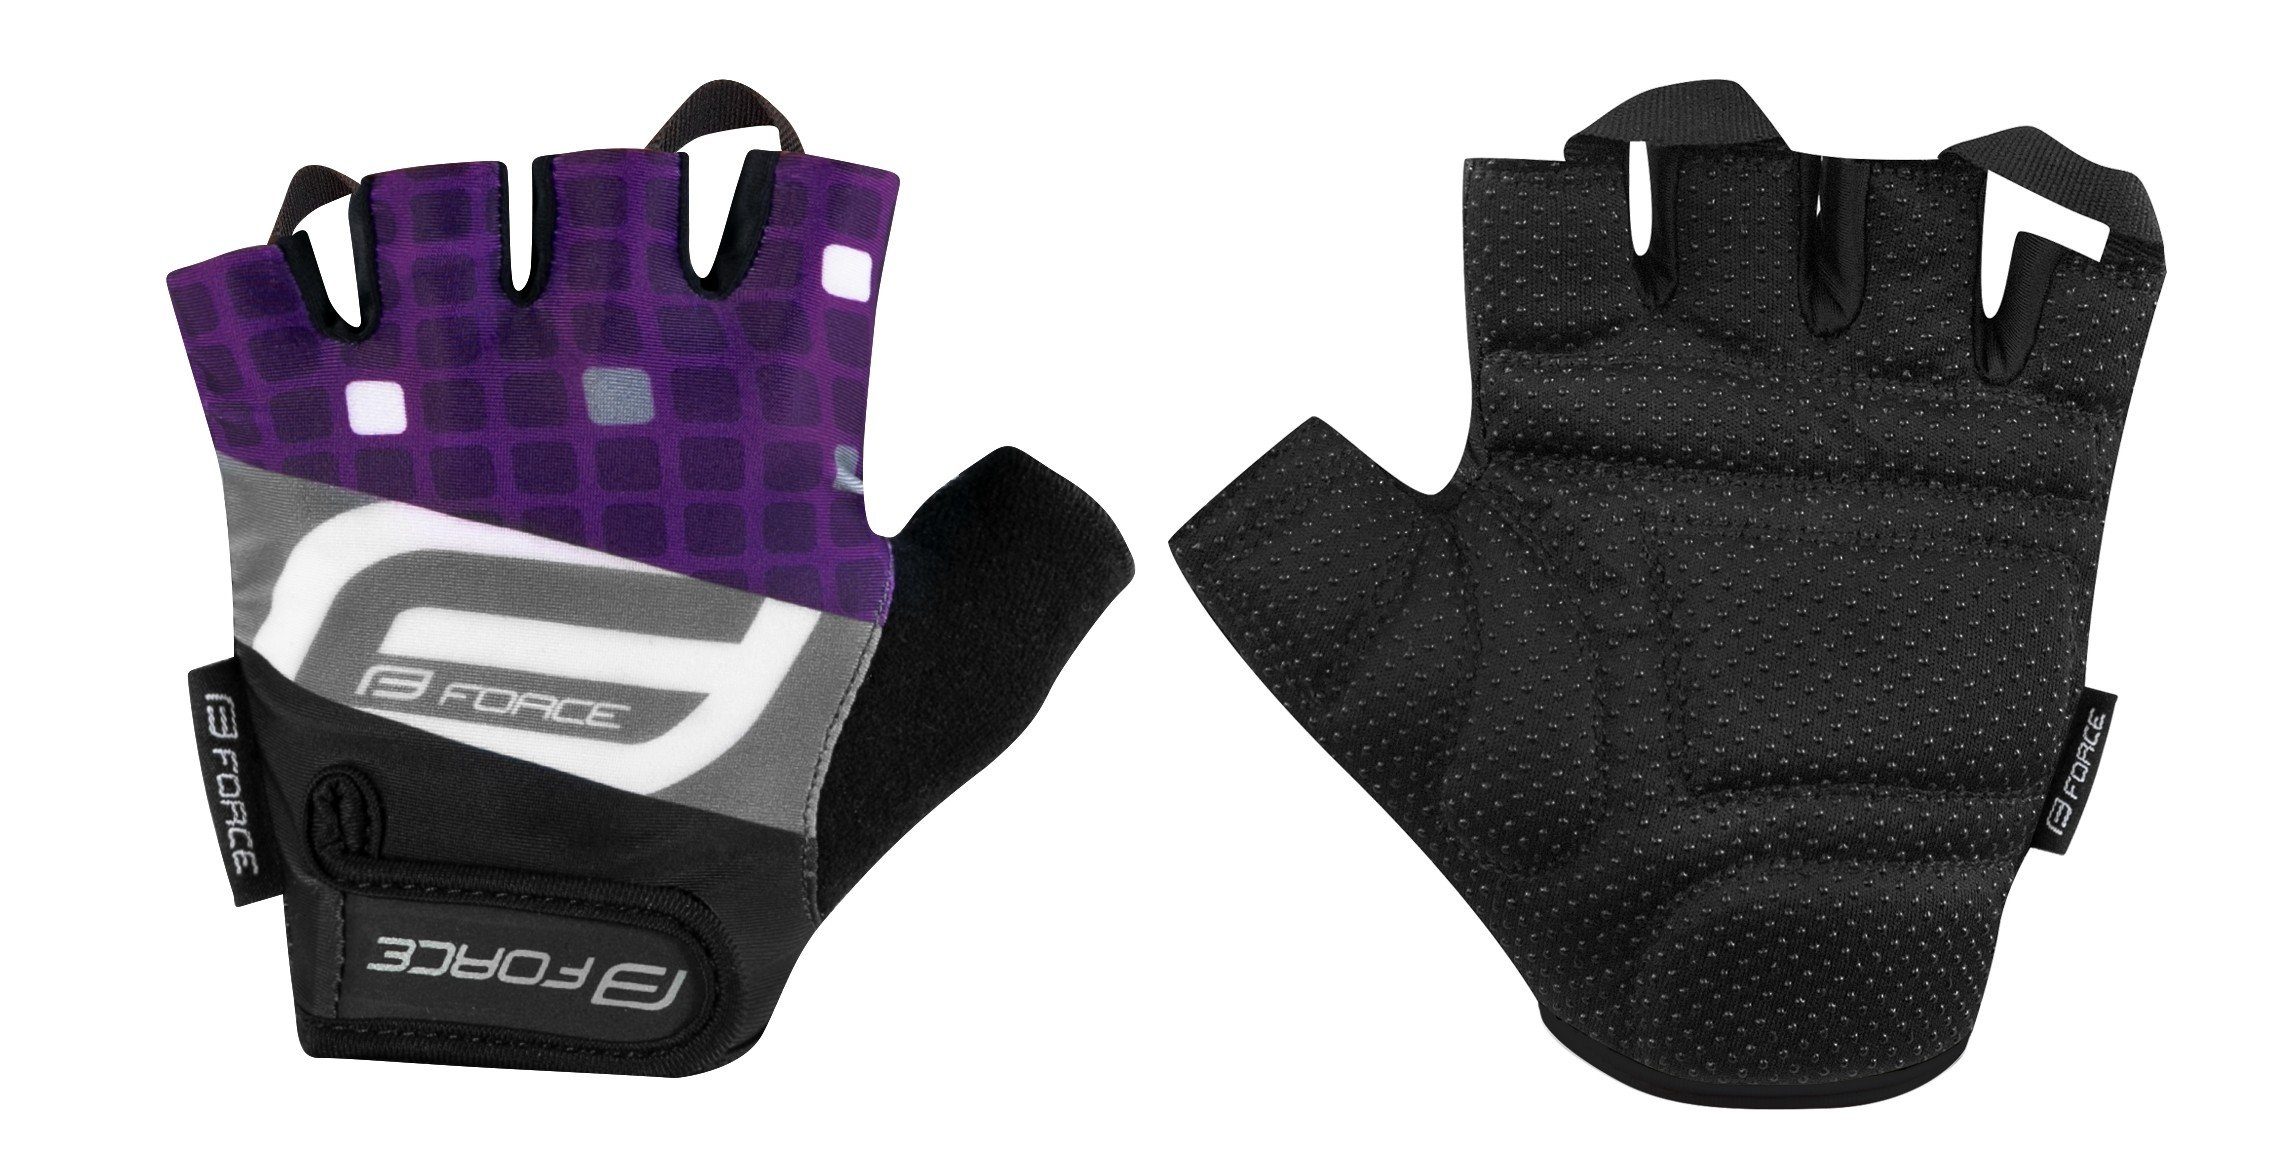 FORCE Fahrradhandschuhe Handschuhe LADY FORCE SQUARE